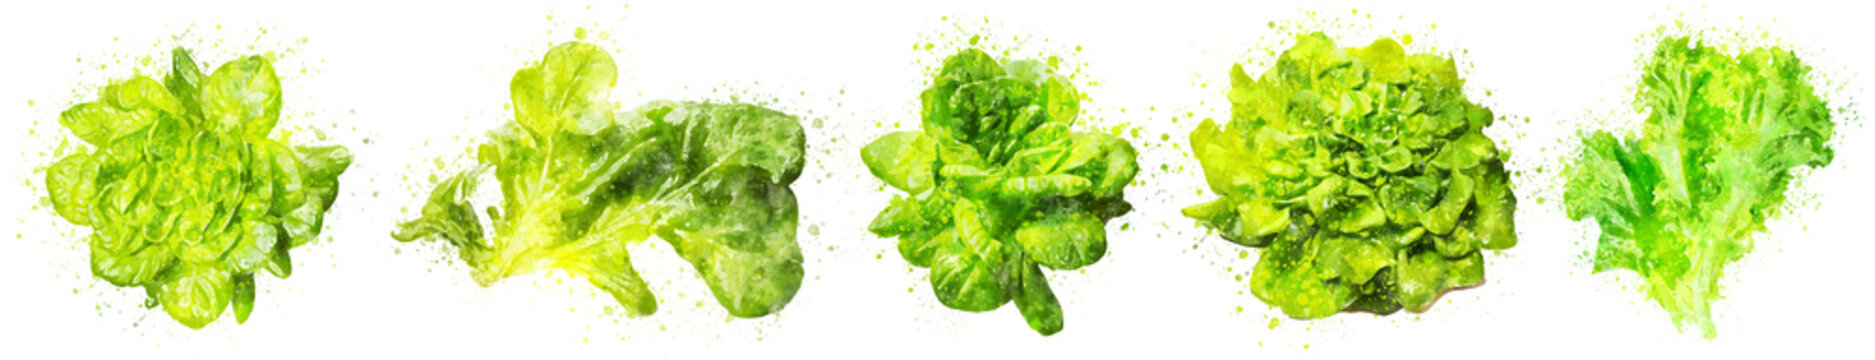 salad lettuce watercolor hand drawn on white background